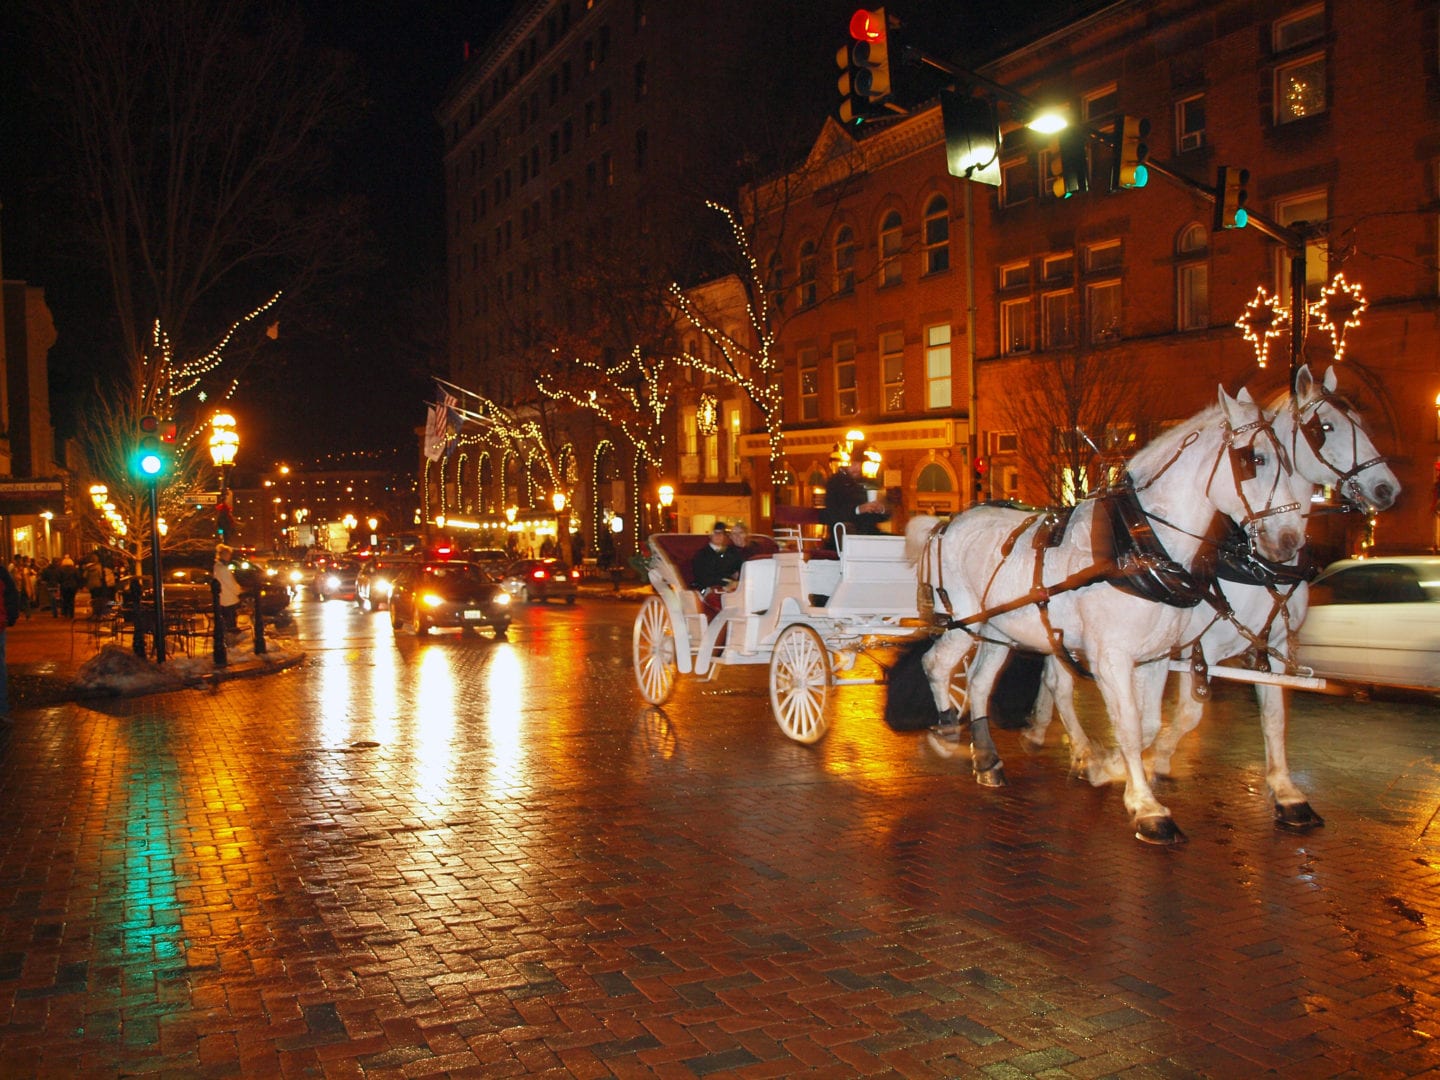 Magical Christmas Towns In The Northeast To Visit With Kids!